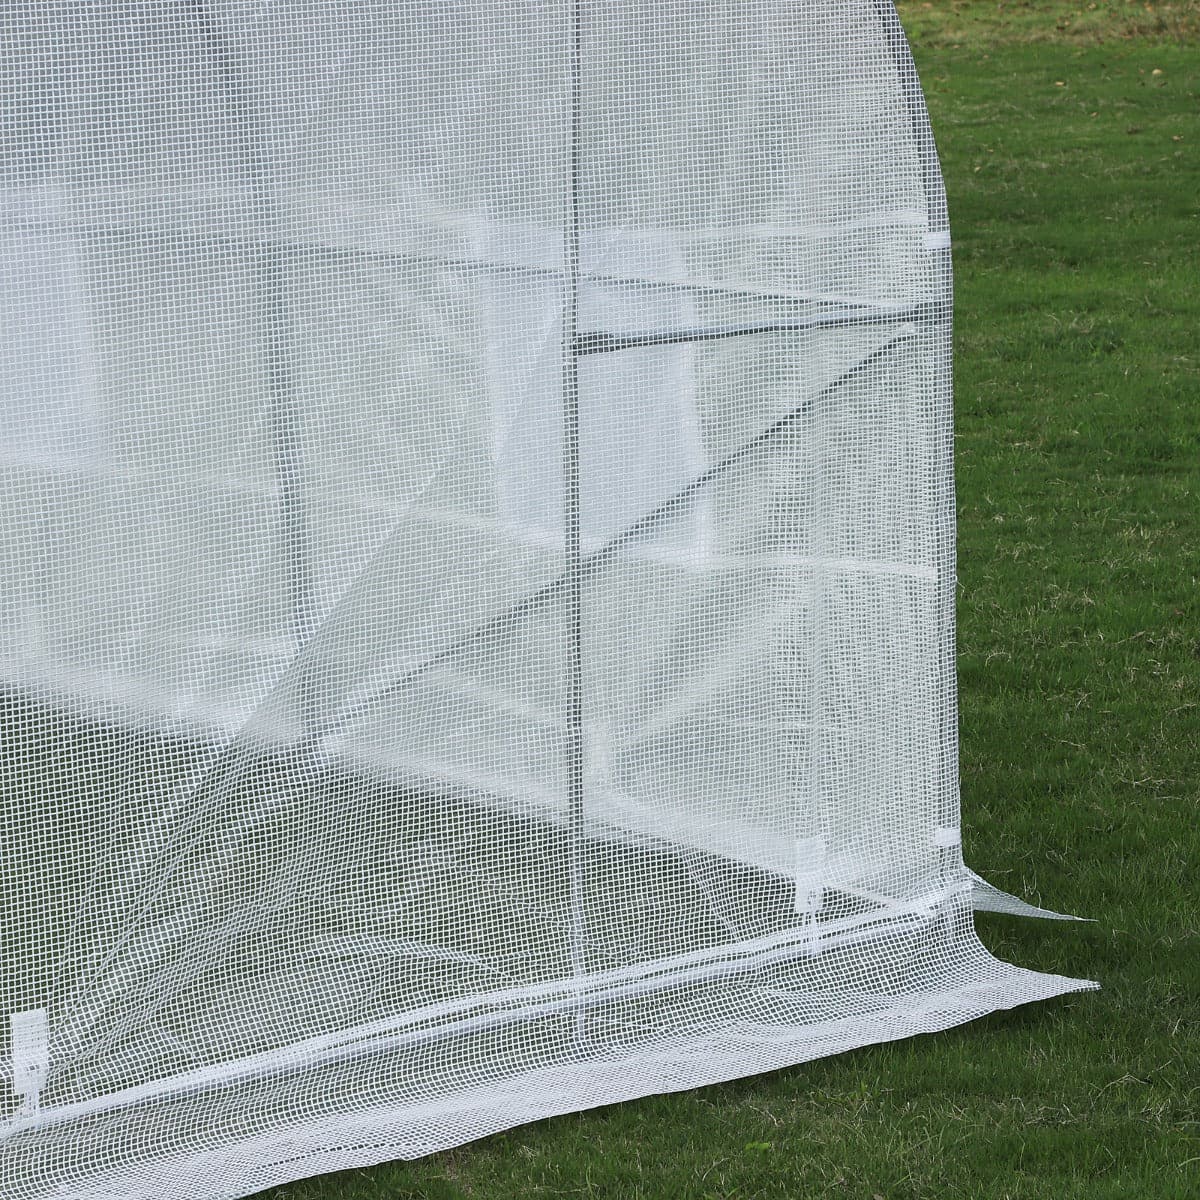 An Aosom Outsunny 20&#39; x 10&#39; x 7&#39; Deluxe High Tunnel Walk-in Garden Greenhouse Kit - White with crops and plants on a grassy field.